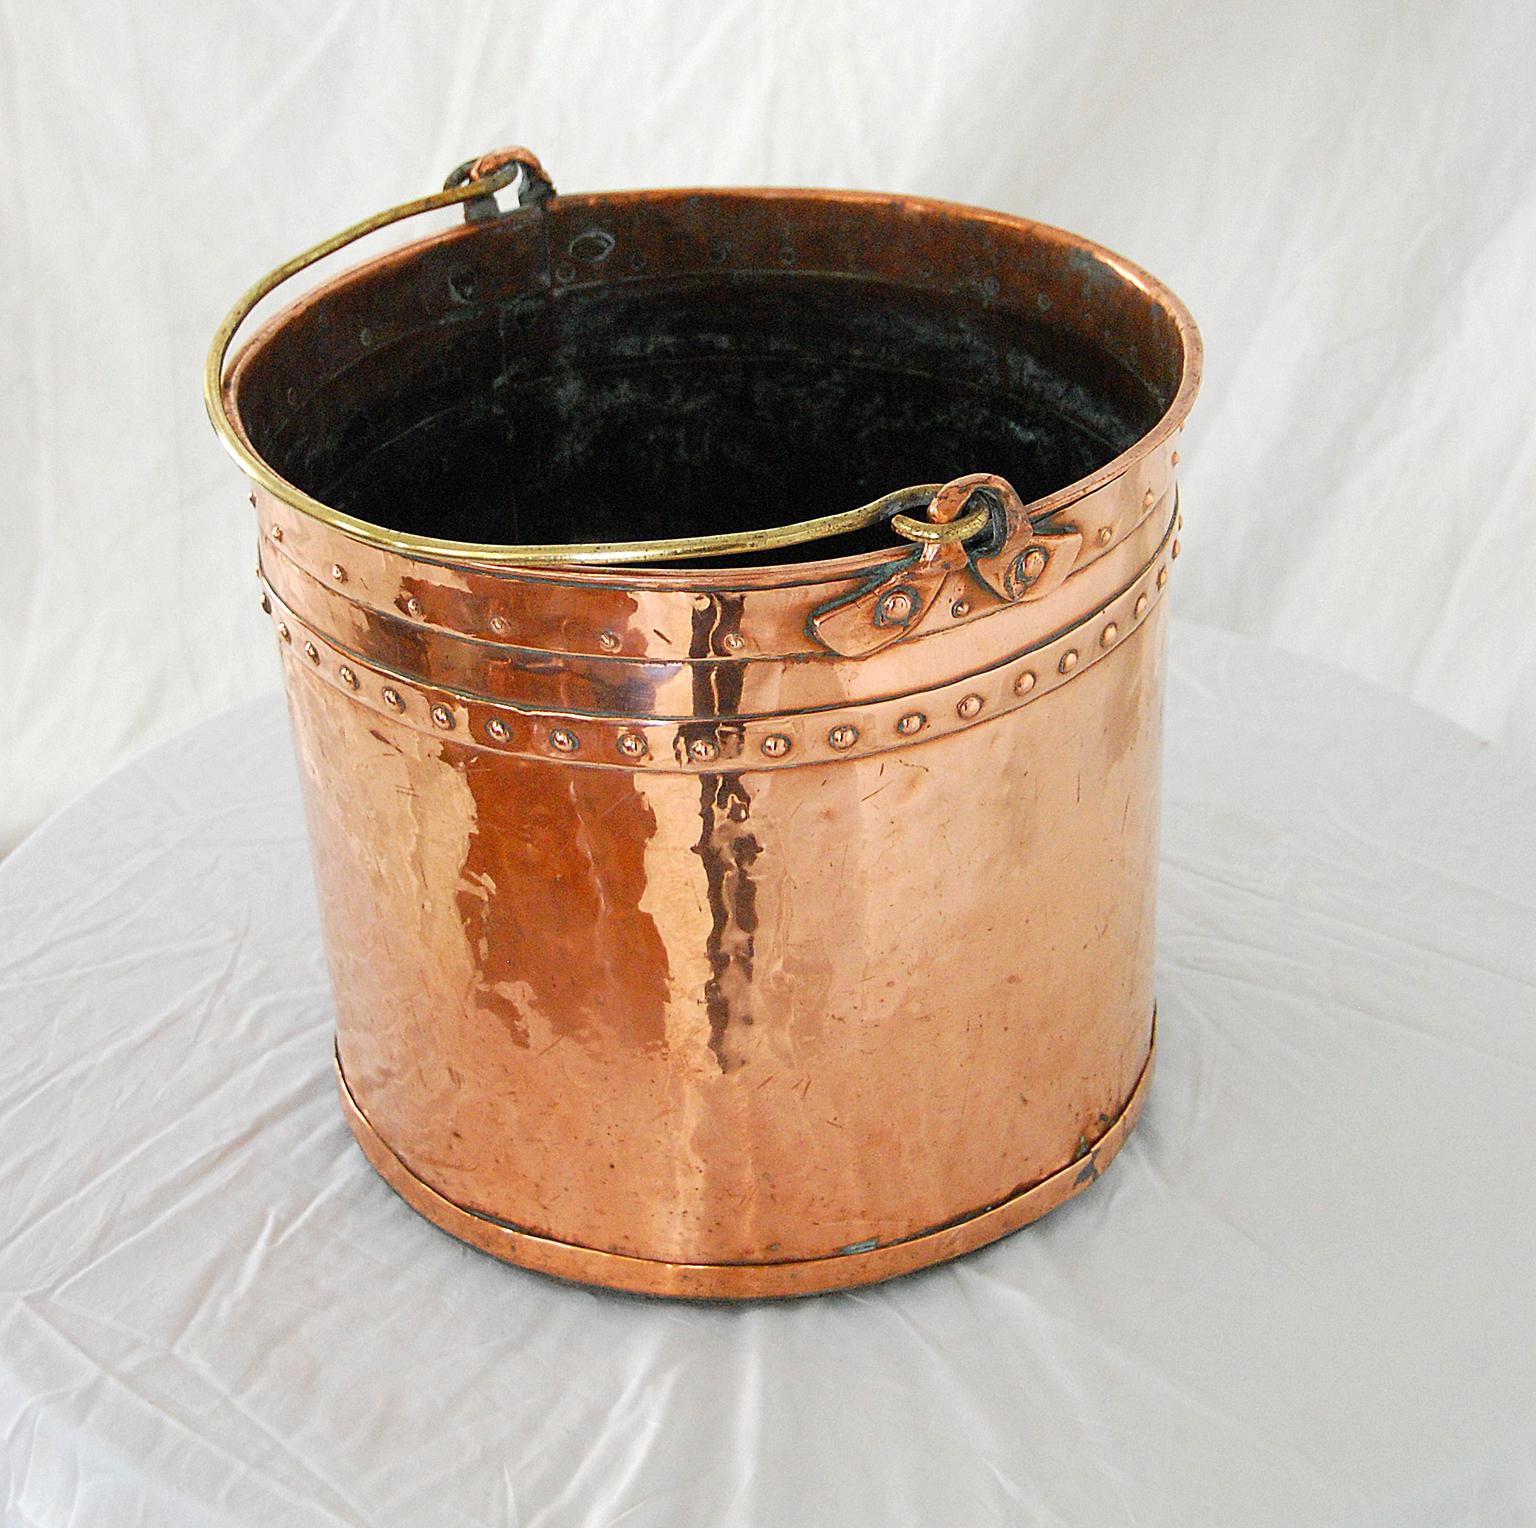 English 19th century copper riveted construction 14 inch coal or ash bucket with brass swing handle. In the Victorian era the maids would use this bucket to bring coal to the fireplace or to take away ash from the fireplace. Today this form is often